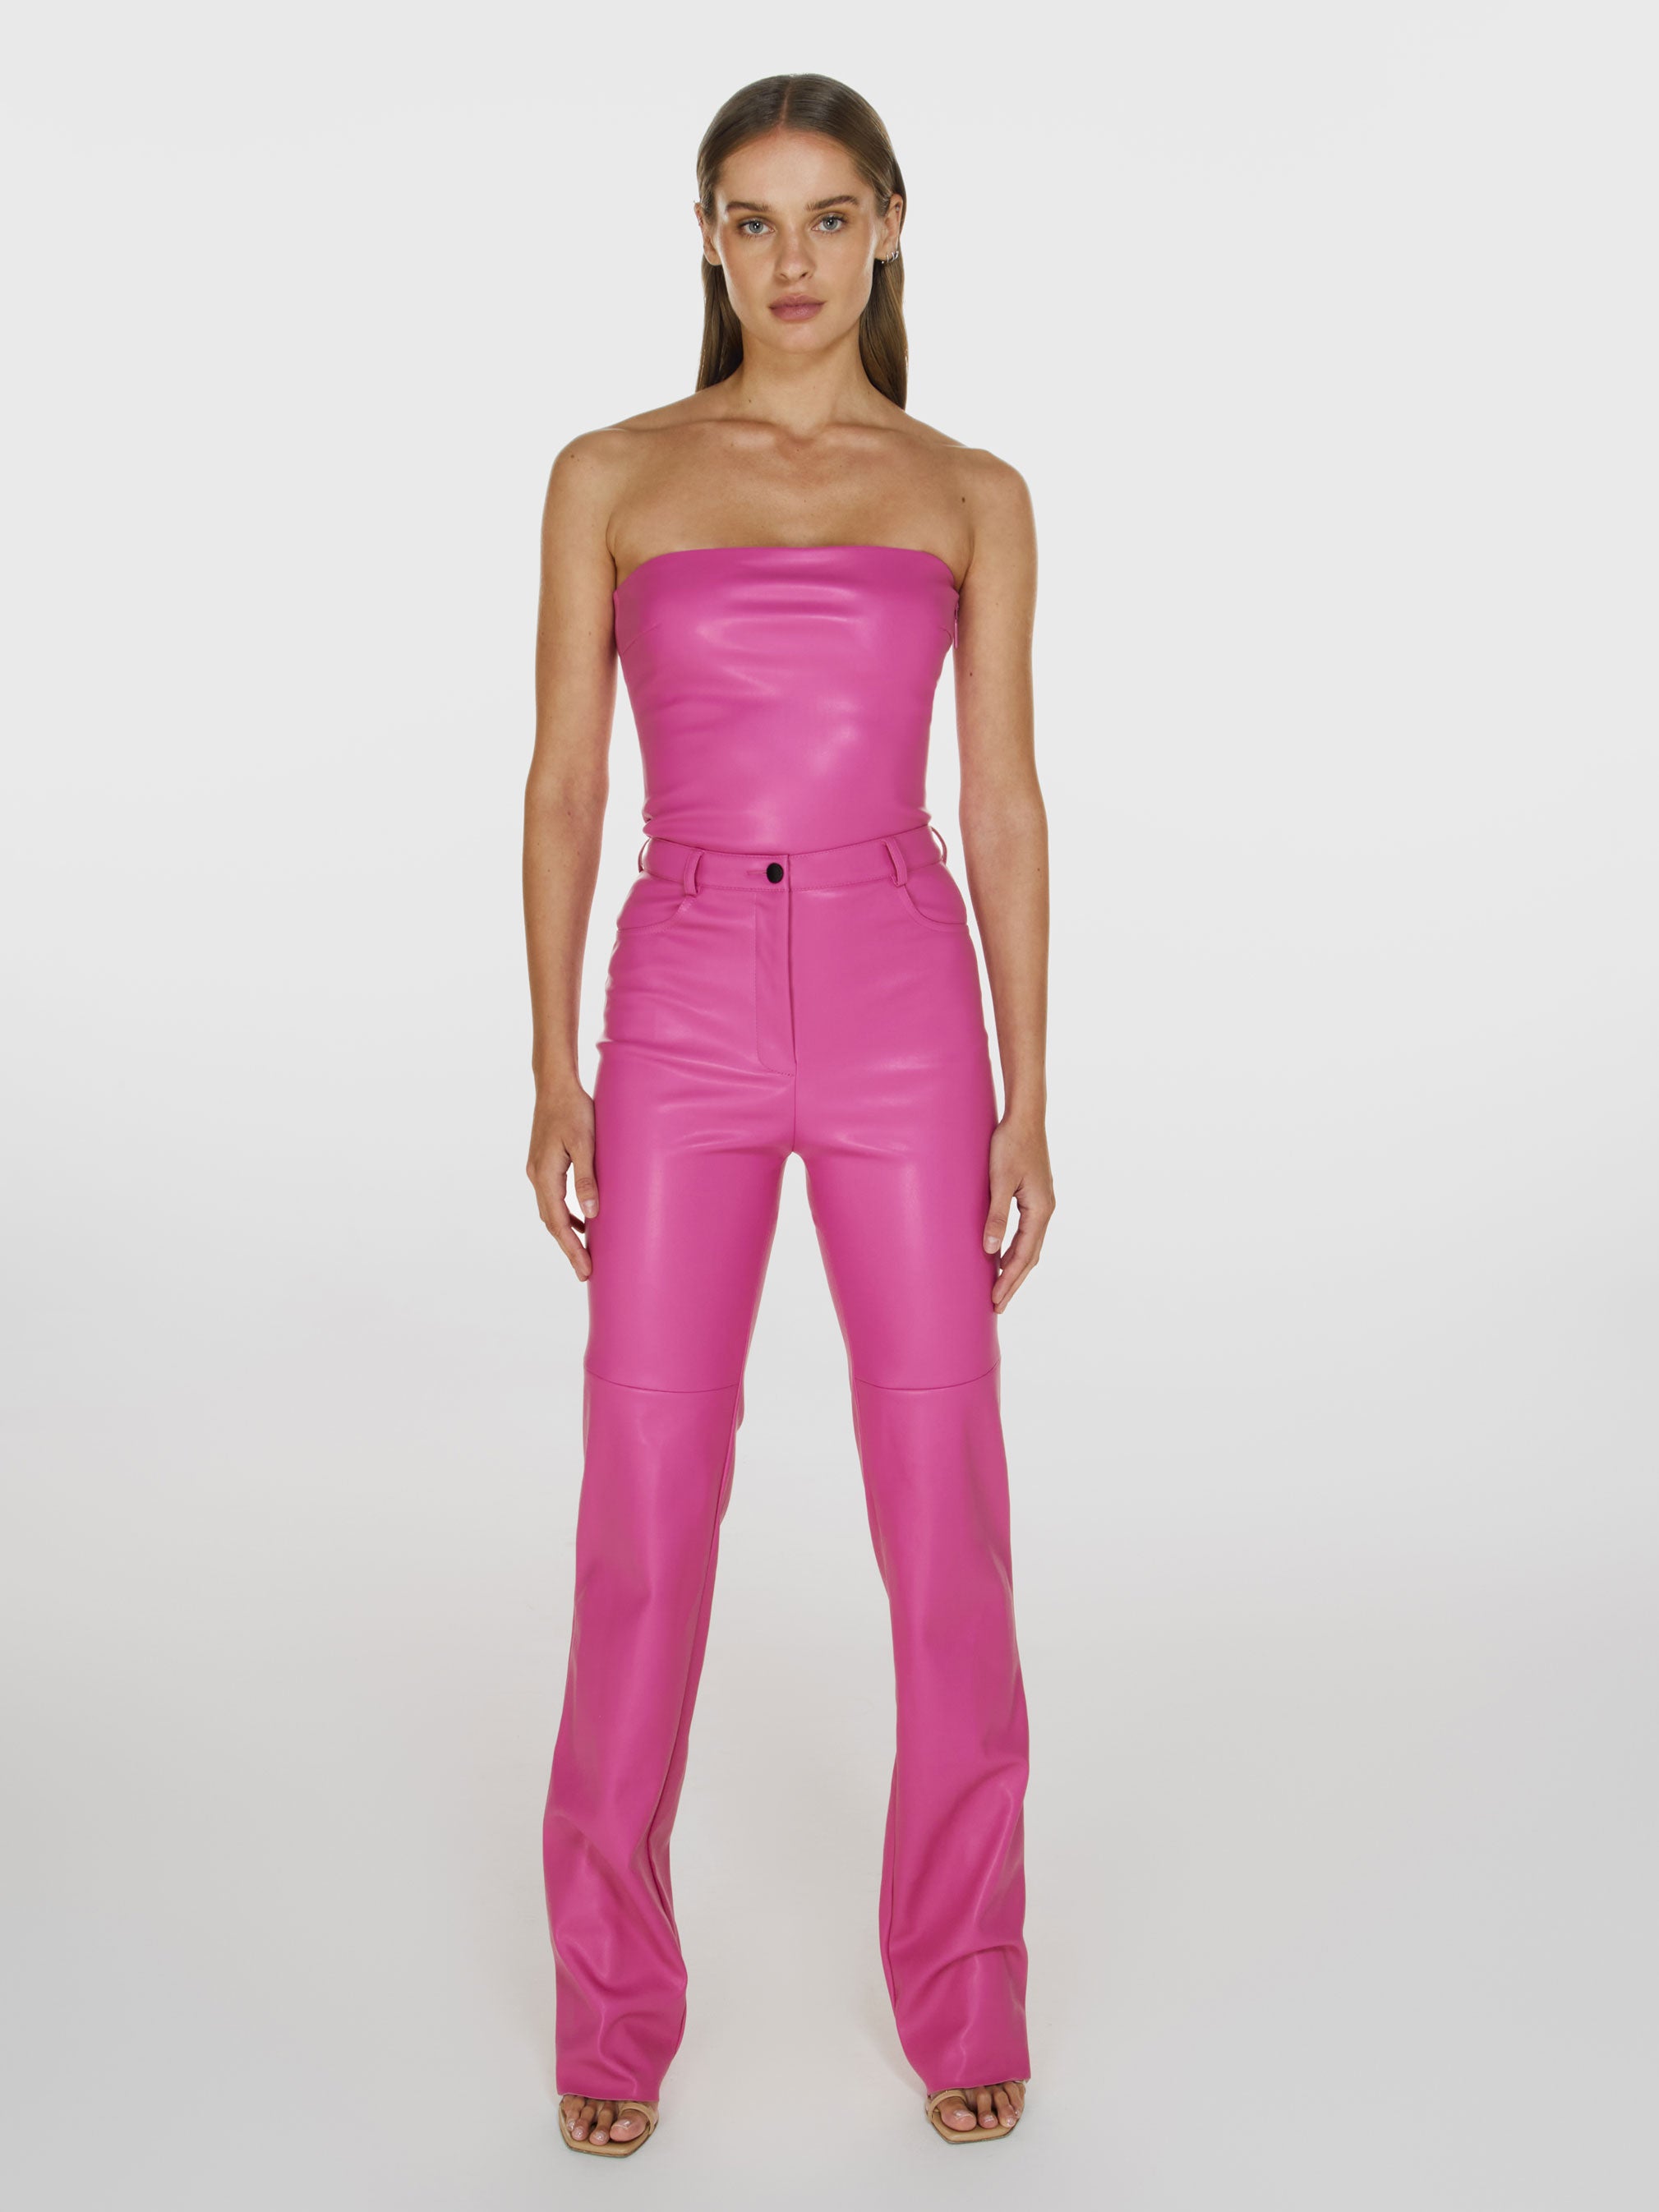 Full shot of a girl in a pink vegan leather tube top and pink vegan leather high rise pants with straight leg